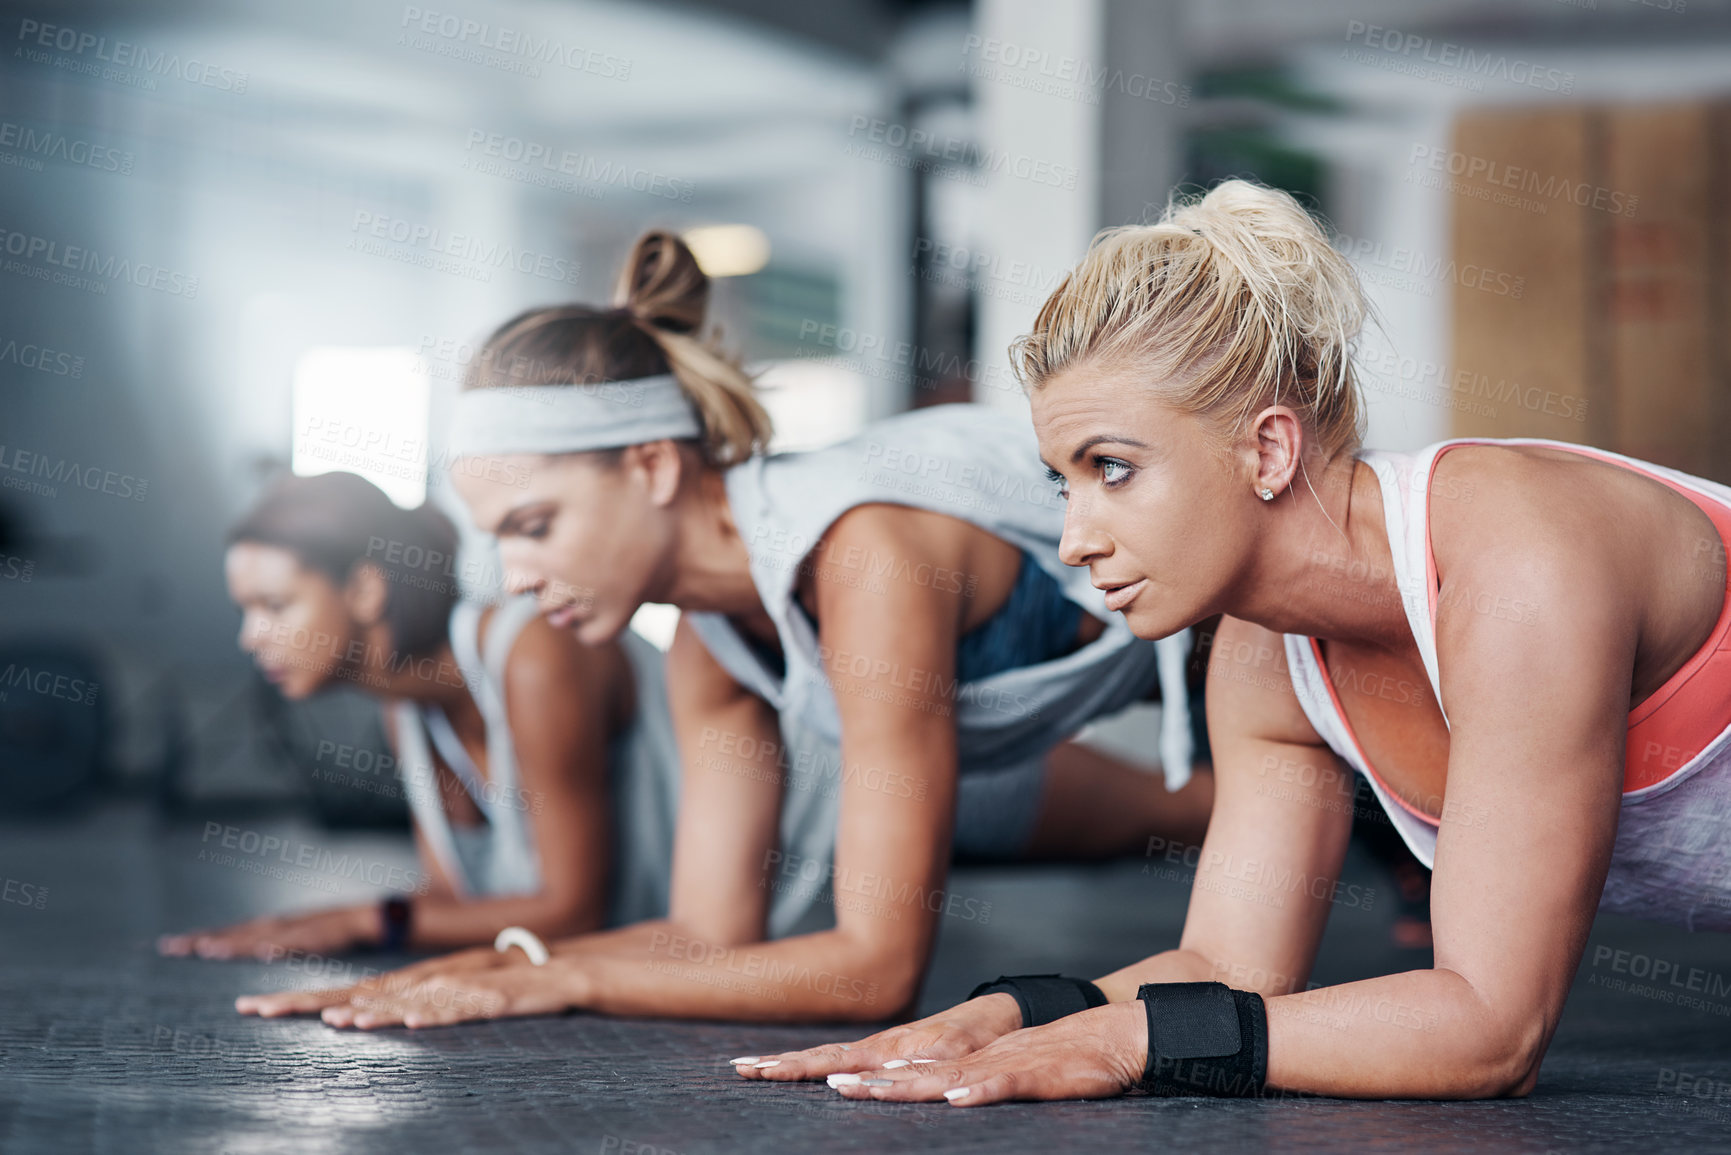 Buy stock photo Cropped shot of three women doing pushups at the gym